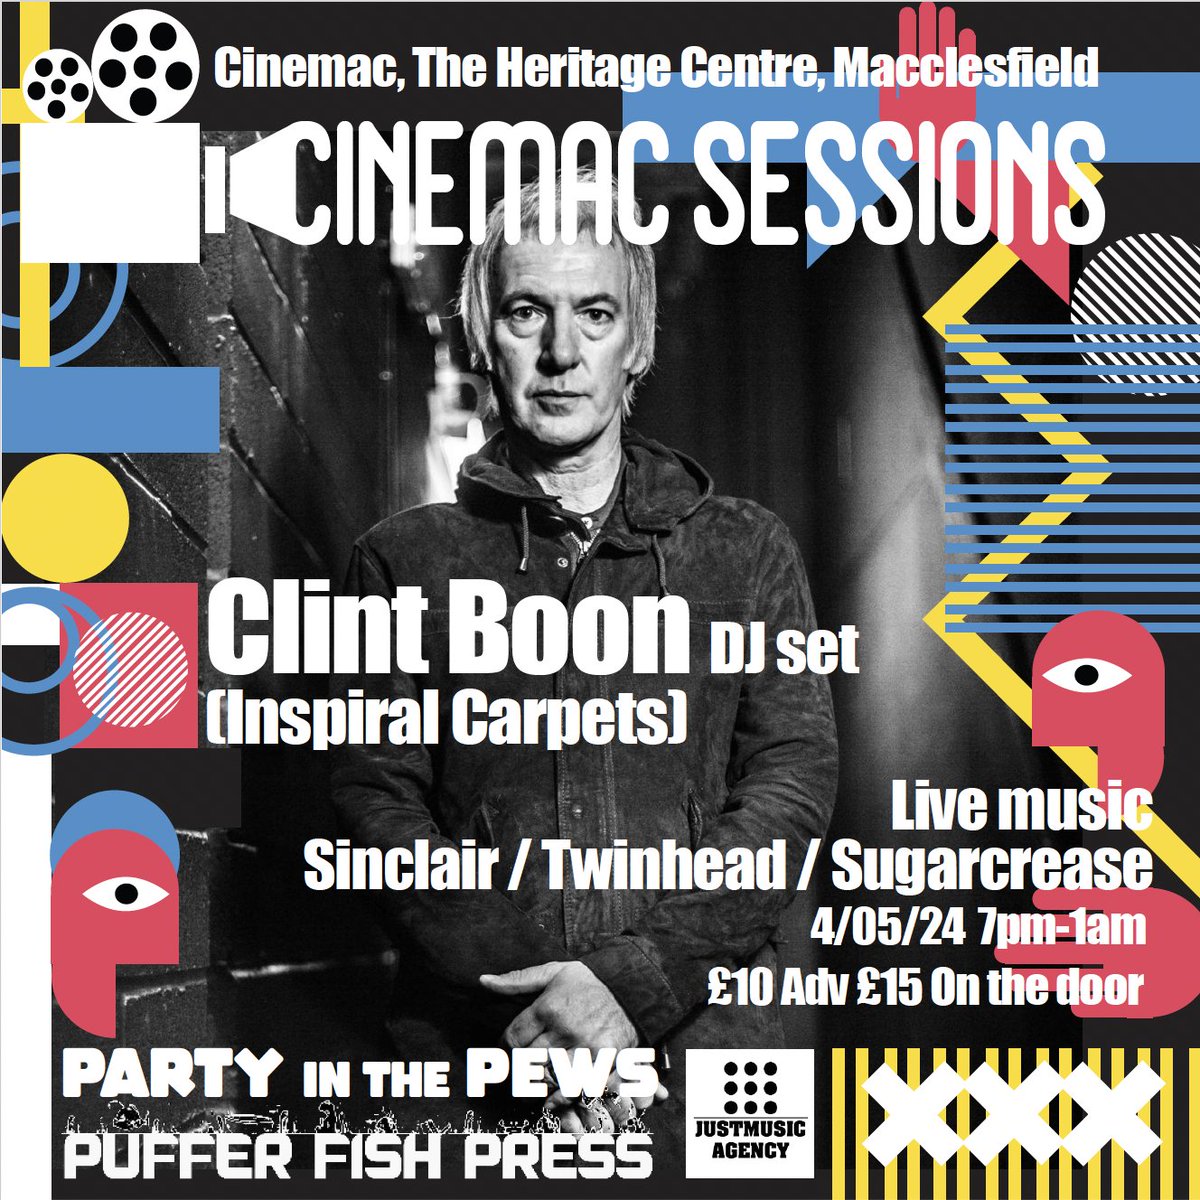 He came he conquered so we just had to have him back..... Stand by Boon Army Clint Boon is coming back to Cinemac Live 4th of May! 3 live bands @SinclairBand , @WEARETWINHEAD and @SugarCrease then a 2hr DJ set Tickets will be on sale from 7pm tonight cinemaclive.co.uk